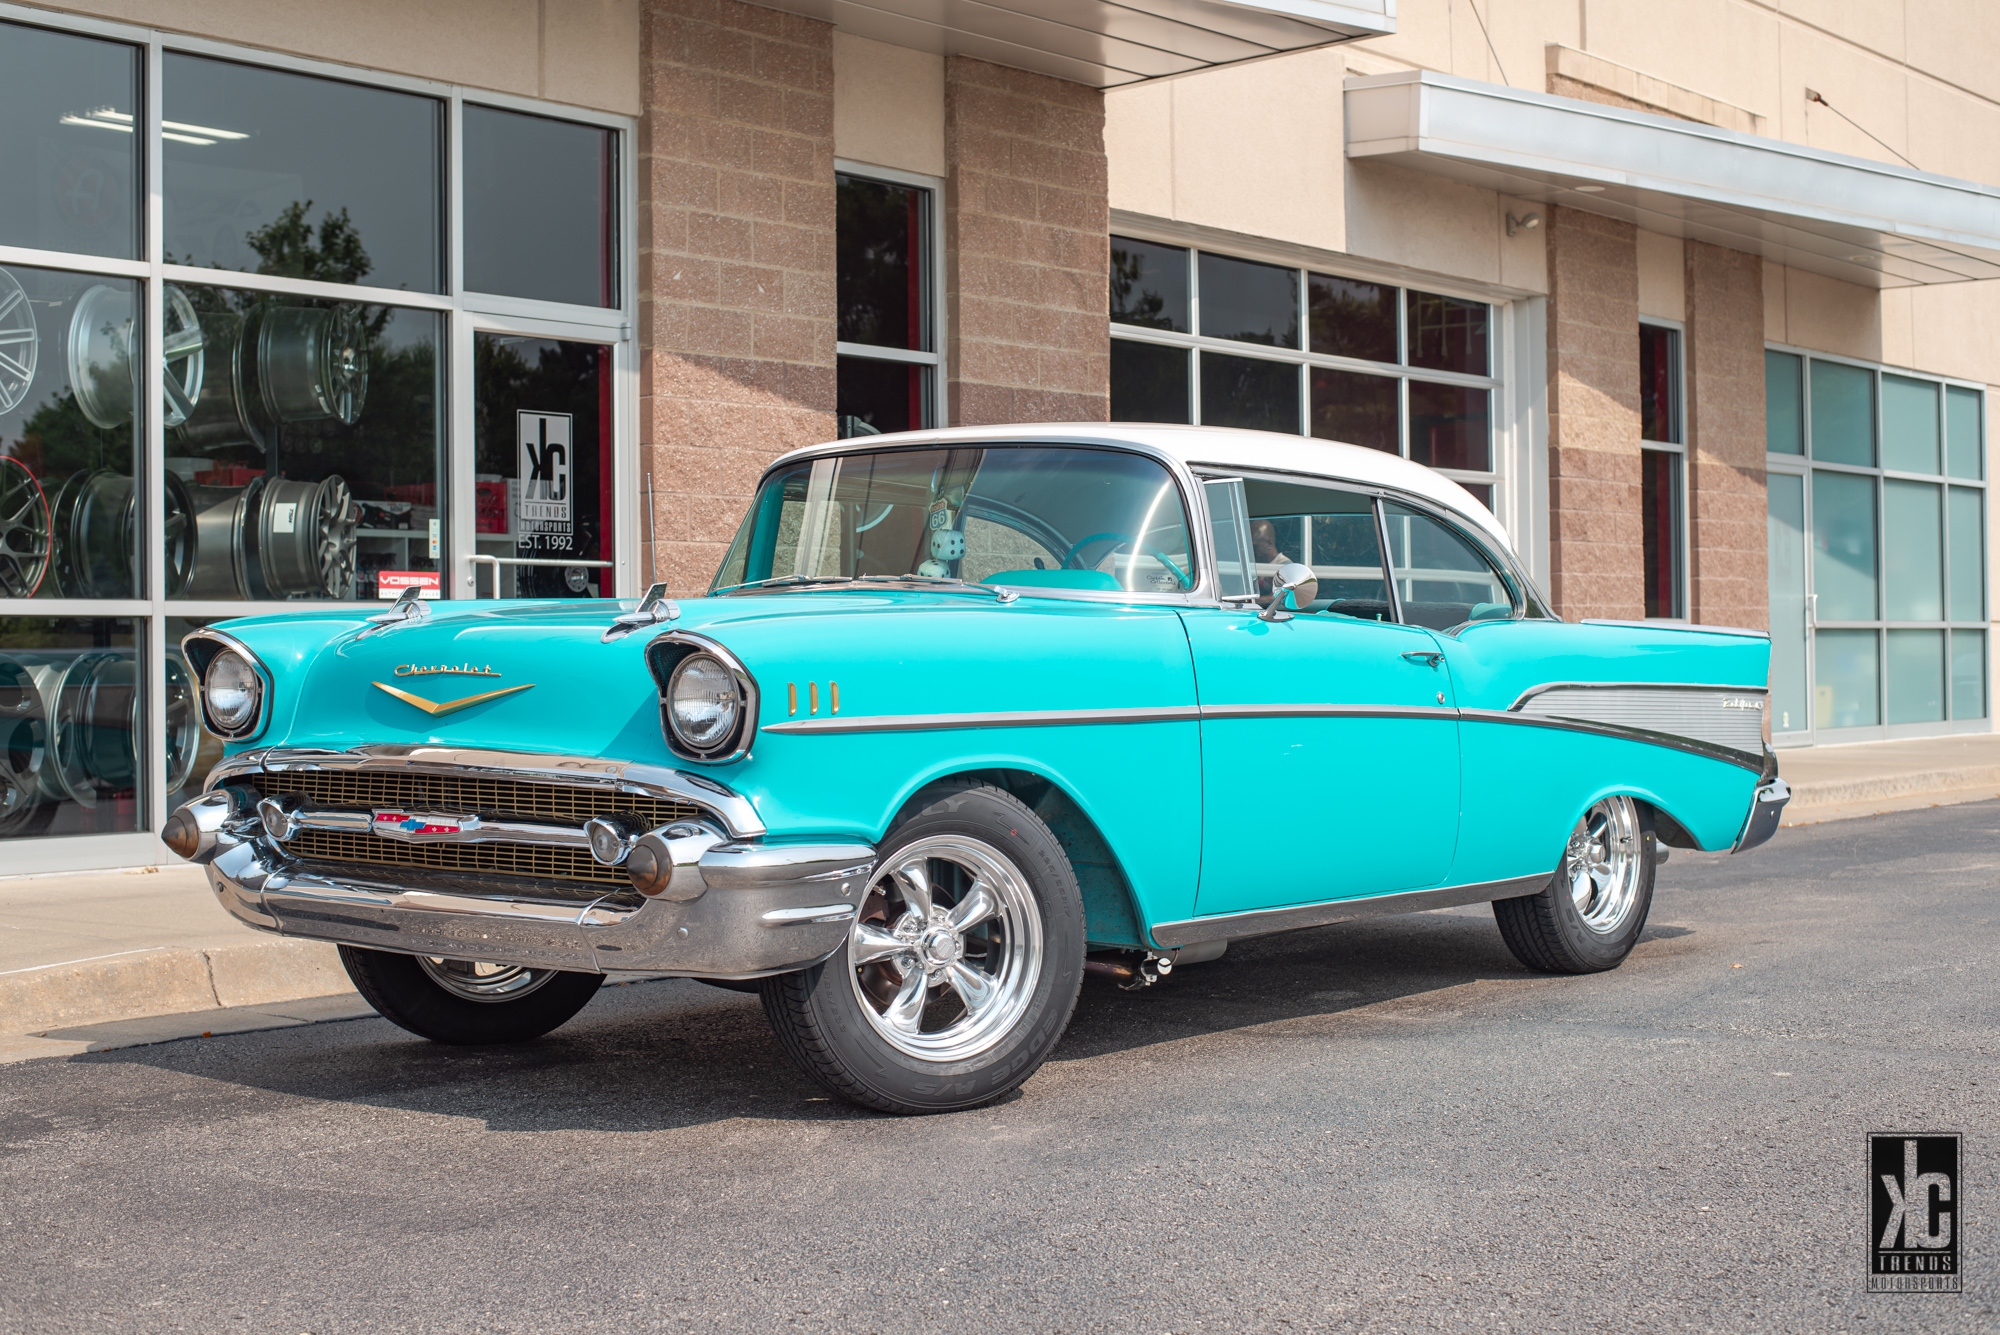  Chevrolet Bel Air with 